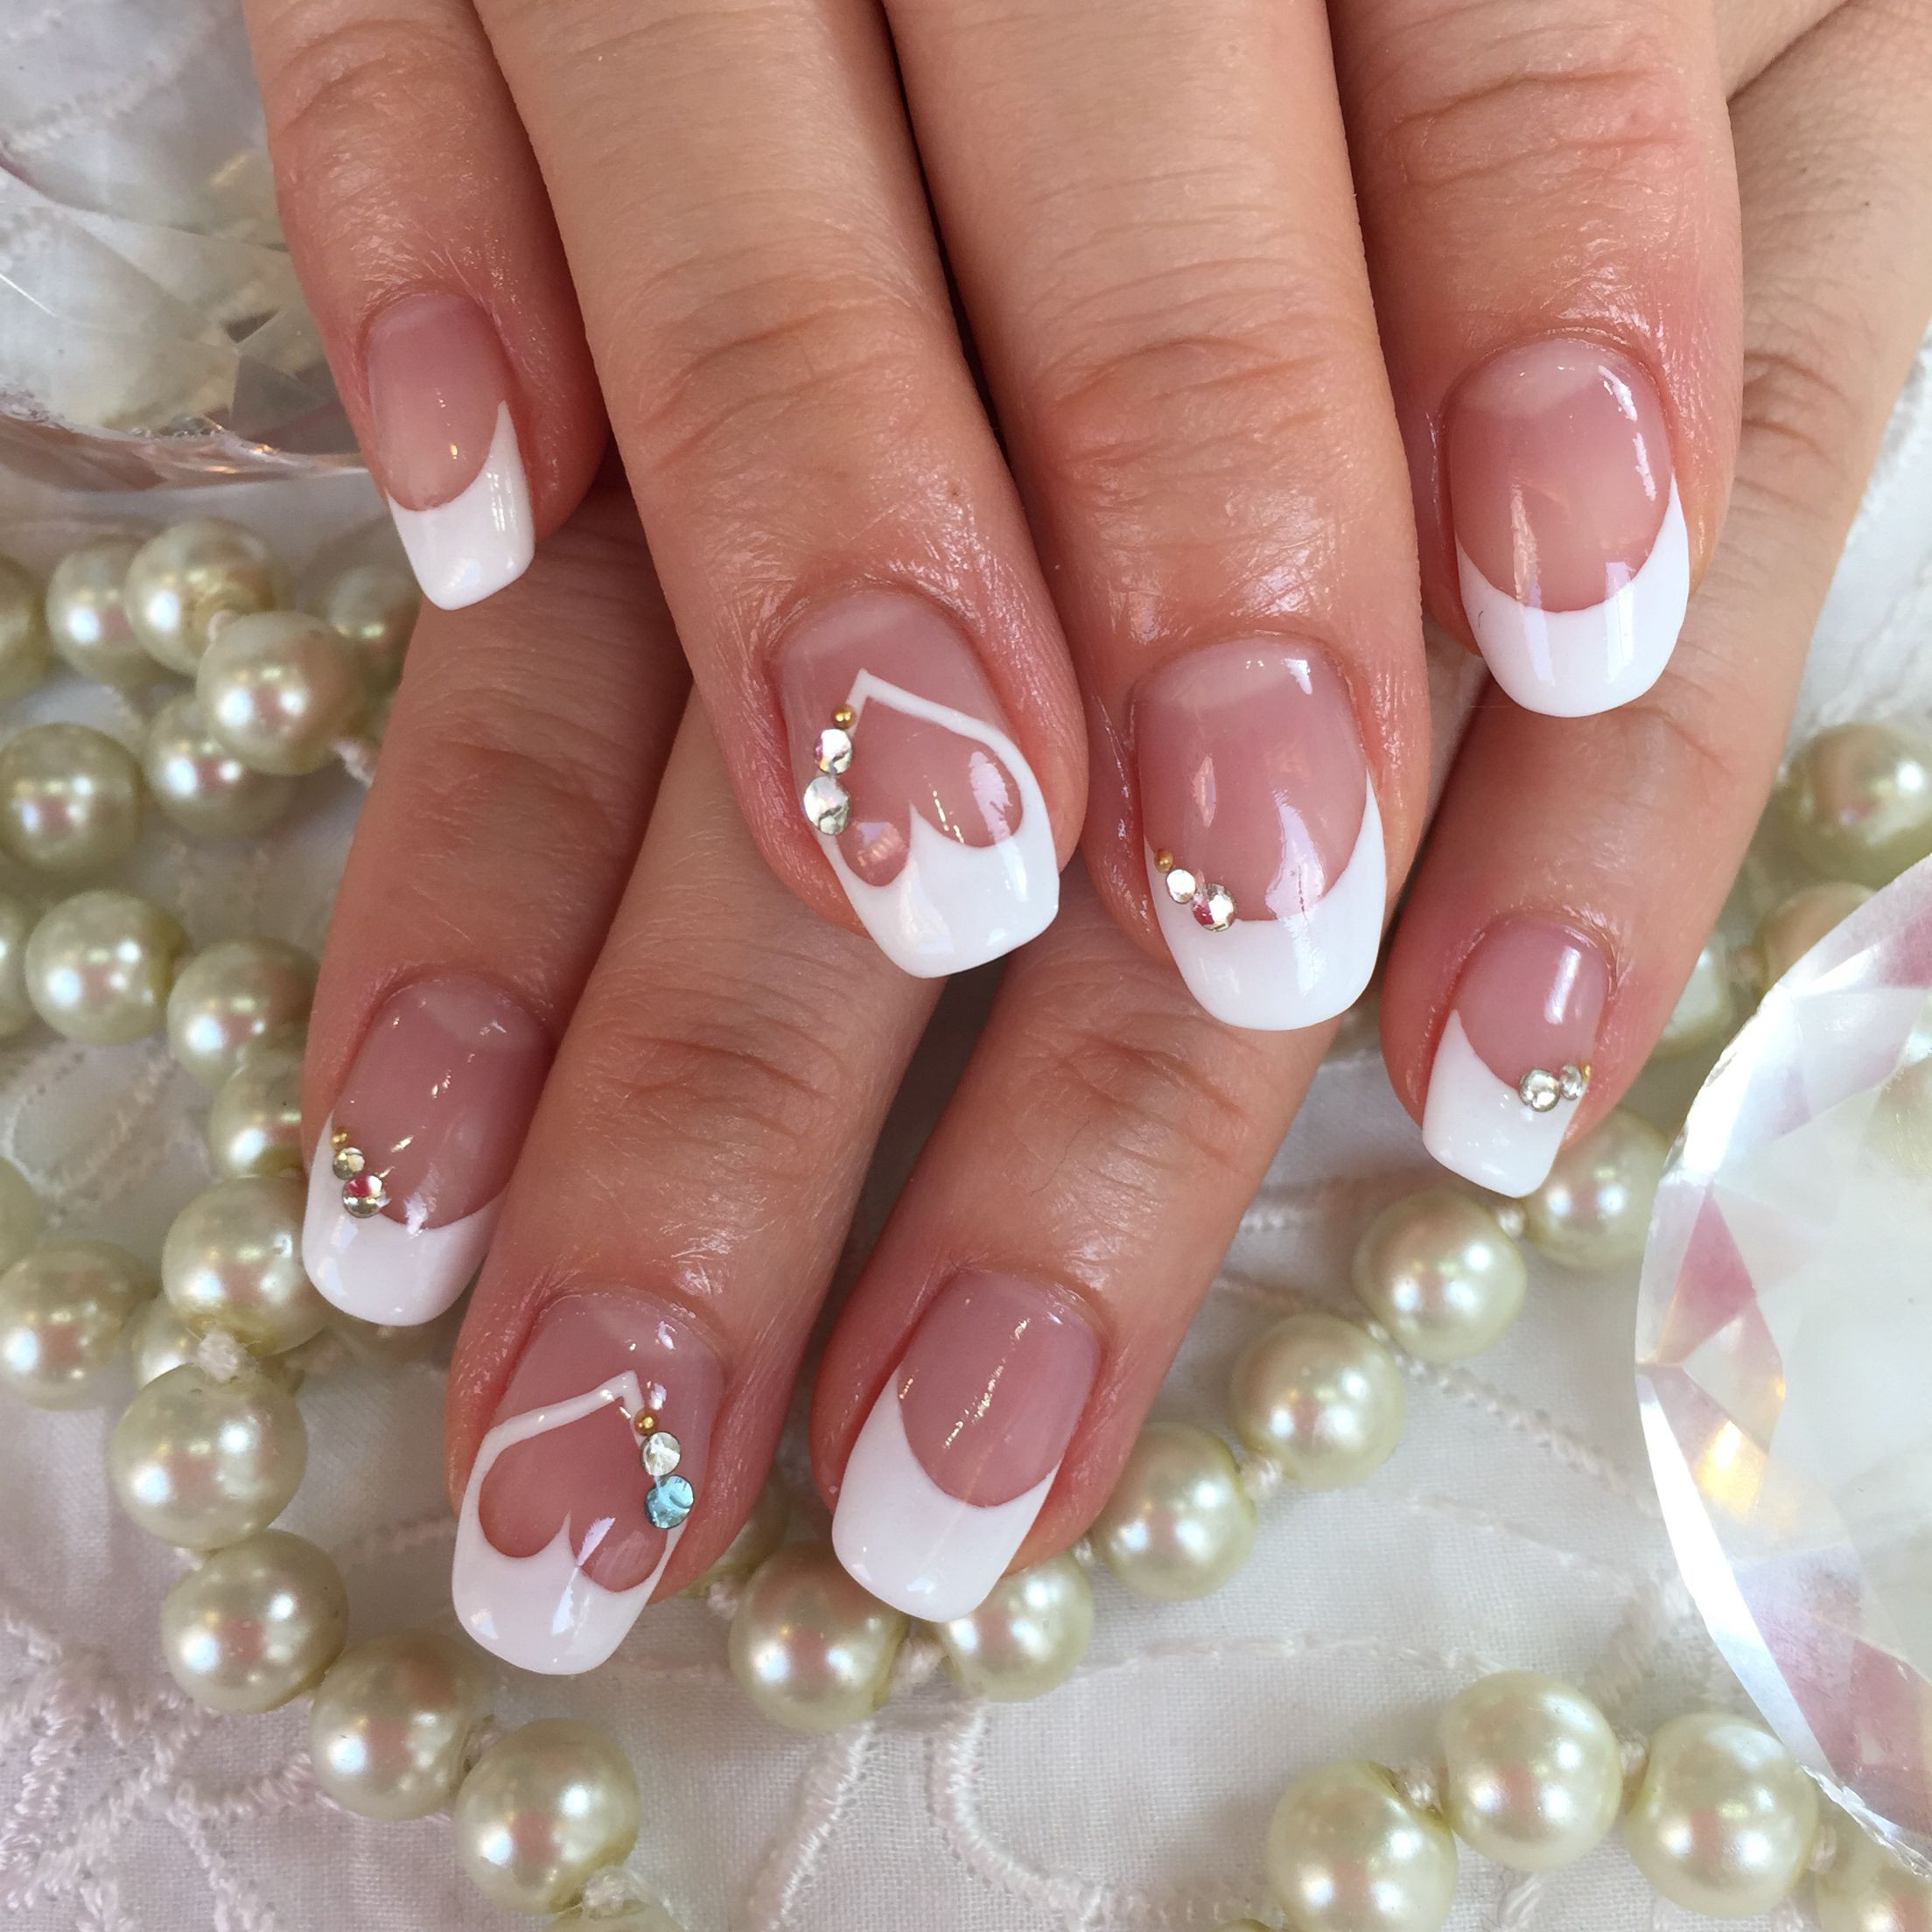 Wedding Nails French Manicure
 this is my real wedding nail